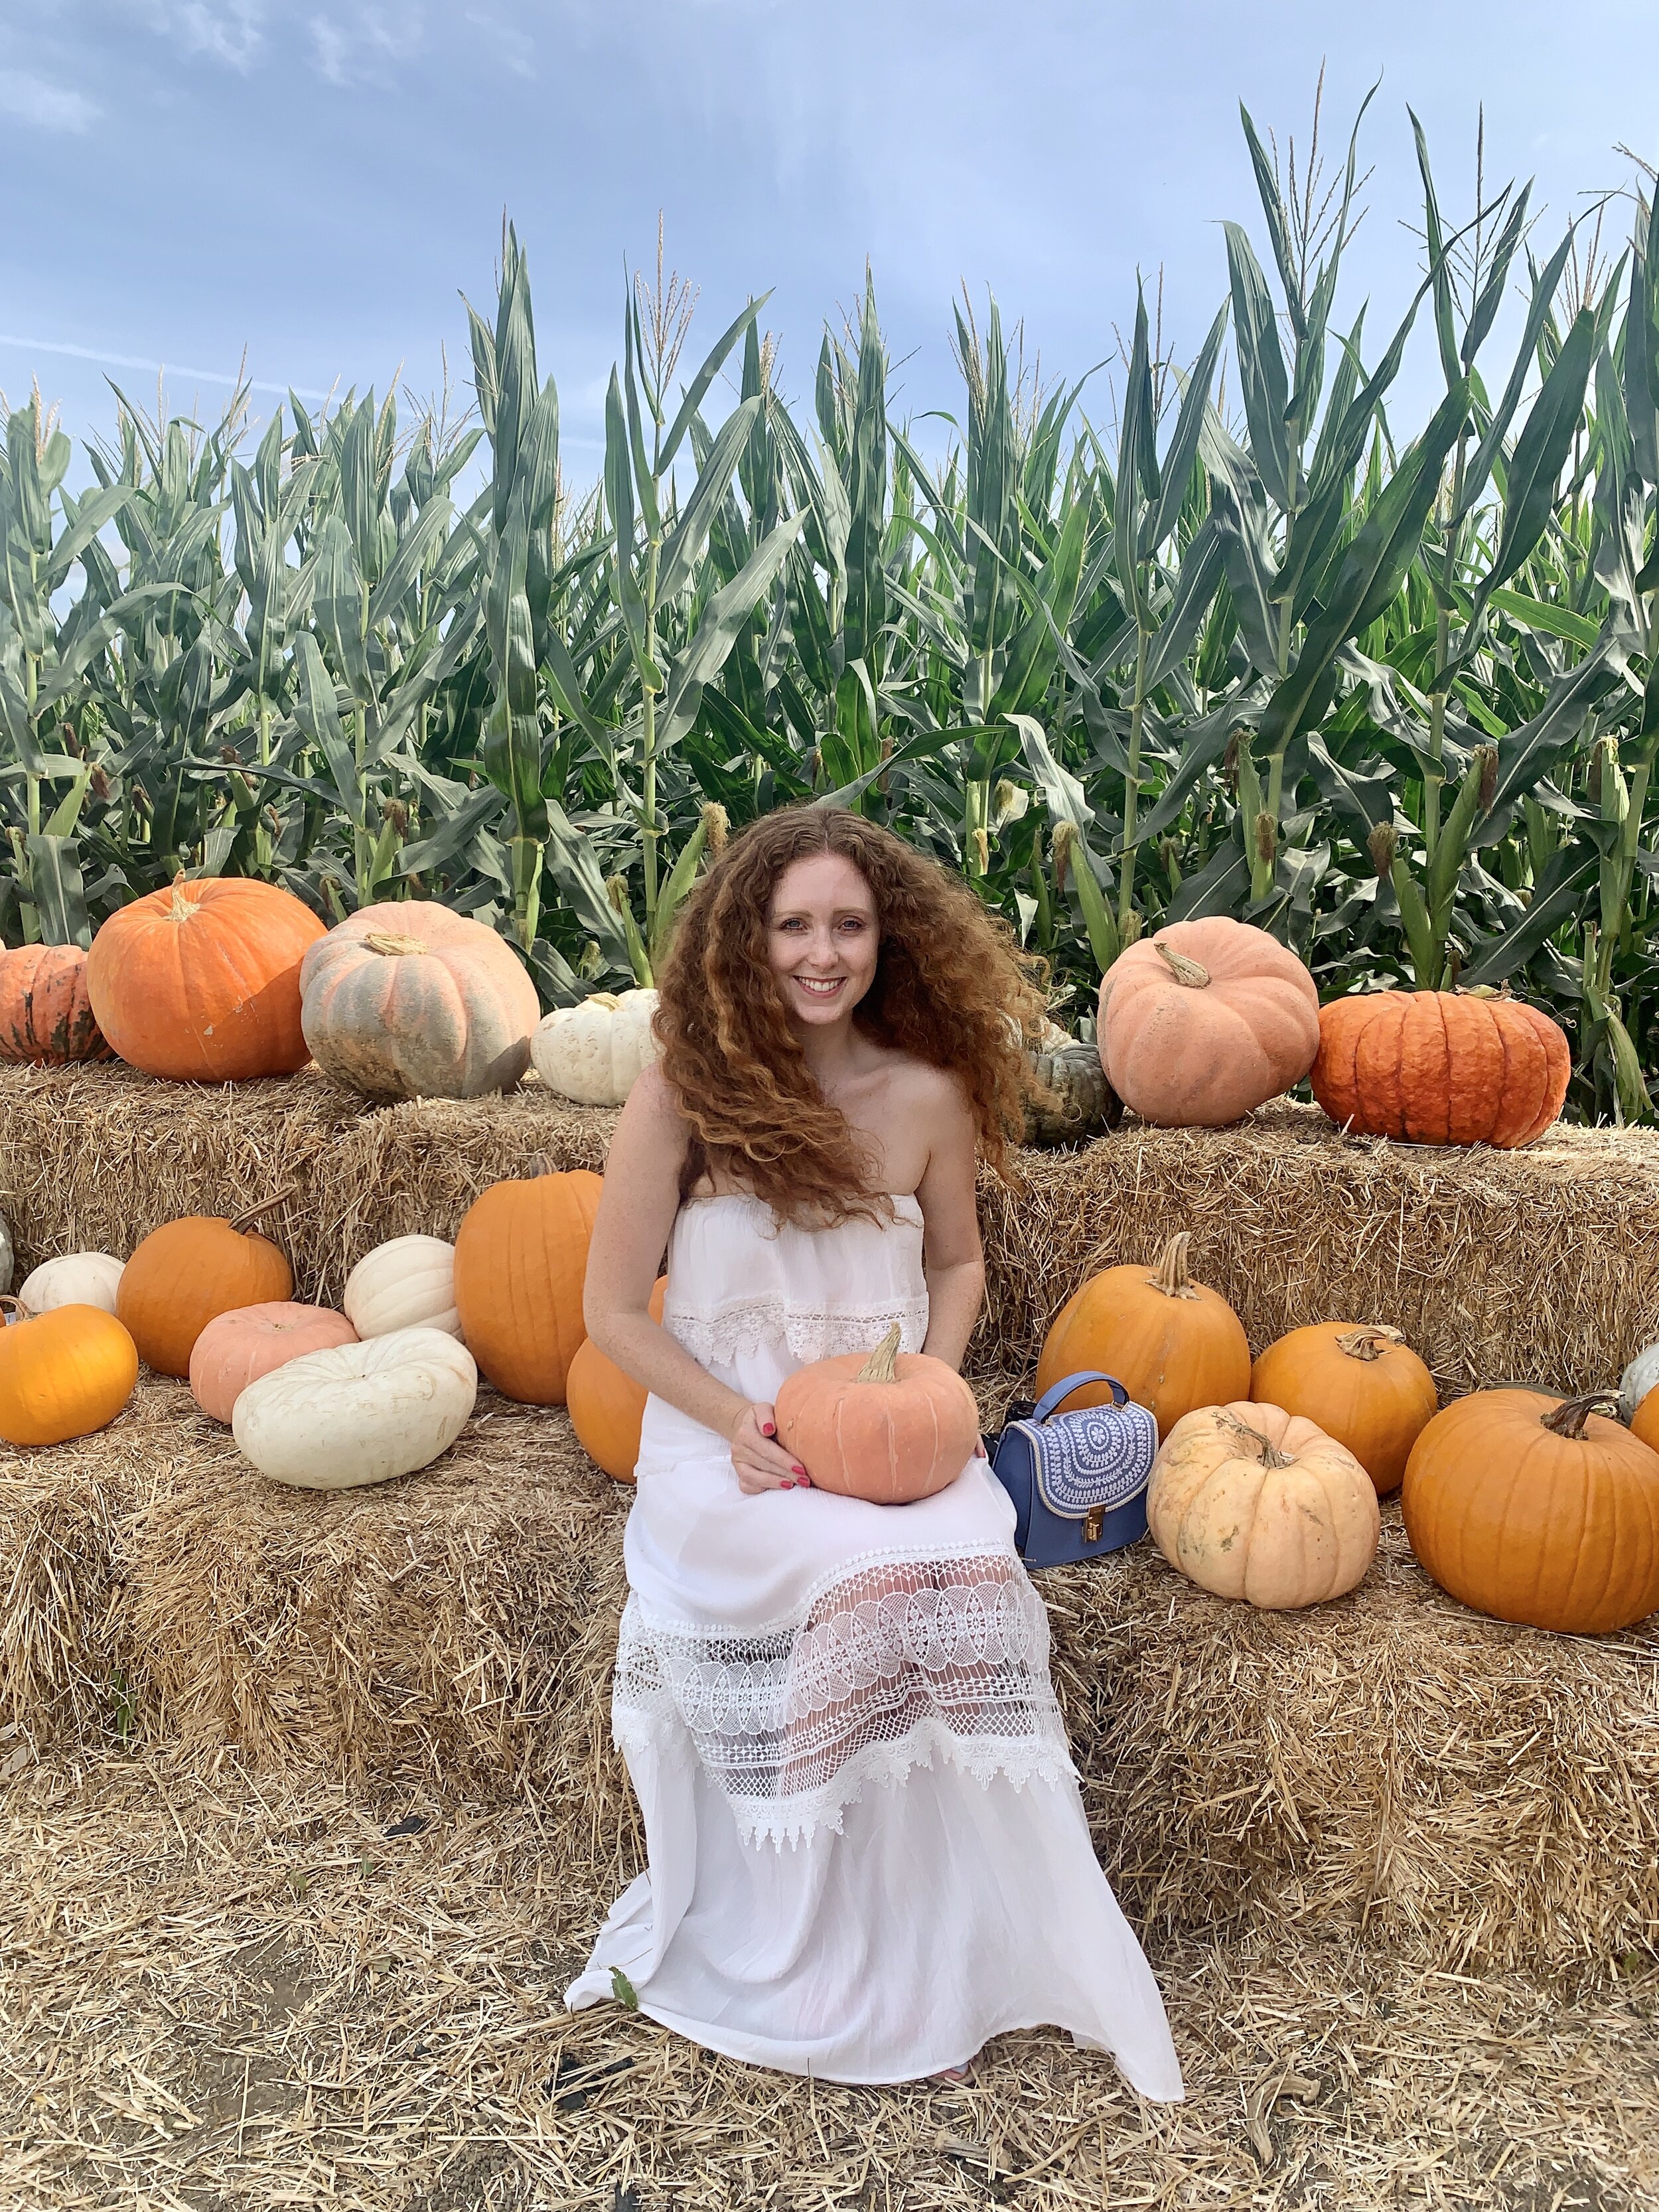 Swank Farms is the best pumpkin patch, sunflower fields and corn mazes near San Francisco and the Bay area. Swank Farms have a Fall Festival which is the perfect day trip from San Francisco, San Jose, Monterrey or Central California. The pumpkin pat…